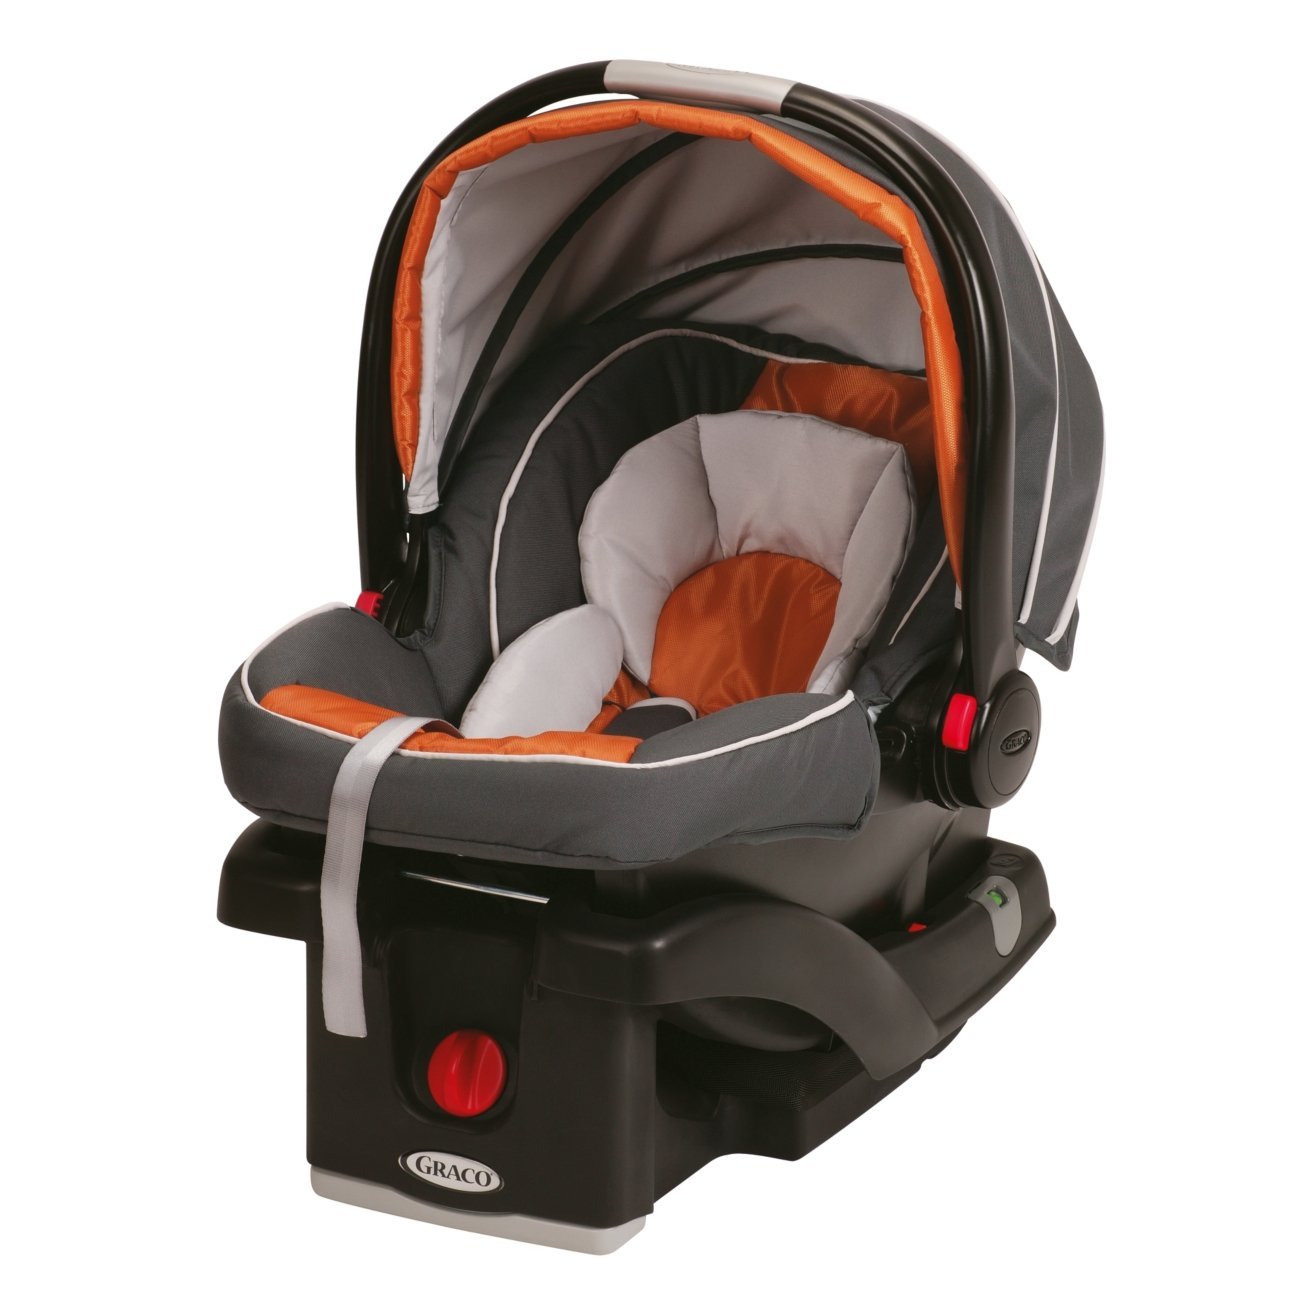 Best Baby Jogging Strollers Reviews: Graco FastAction Fold Jogger Click Connect Stroller